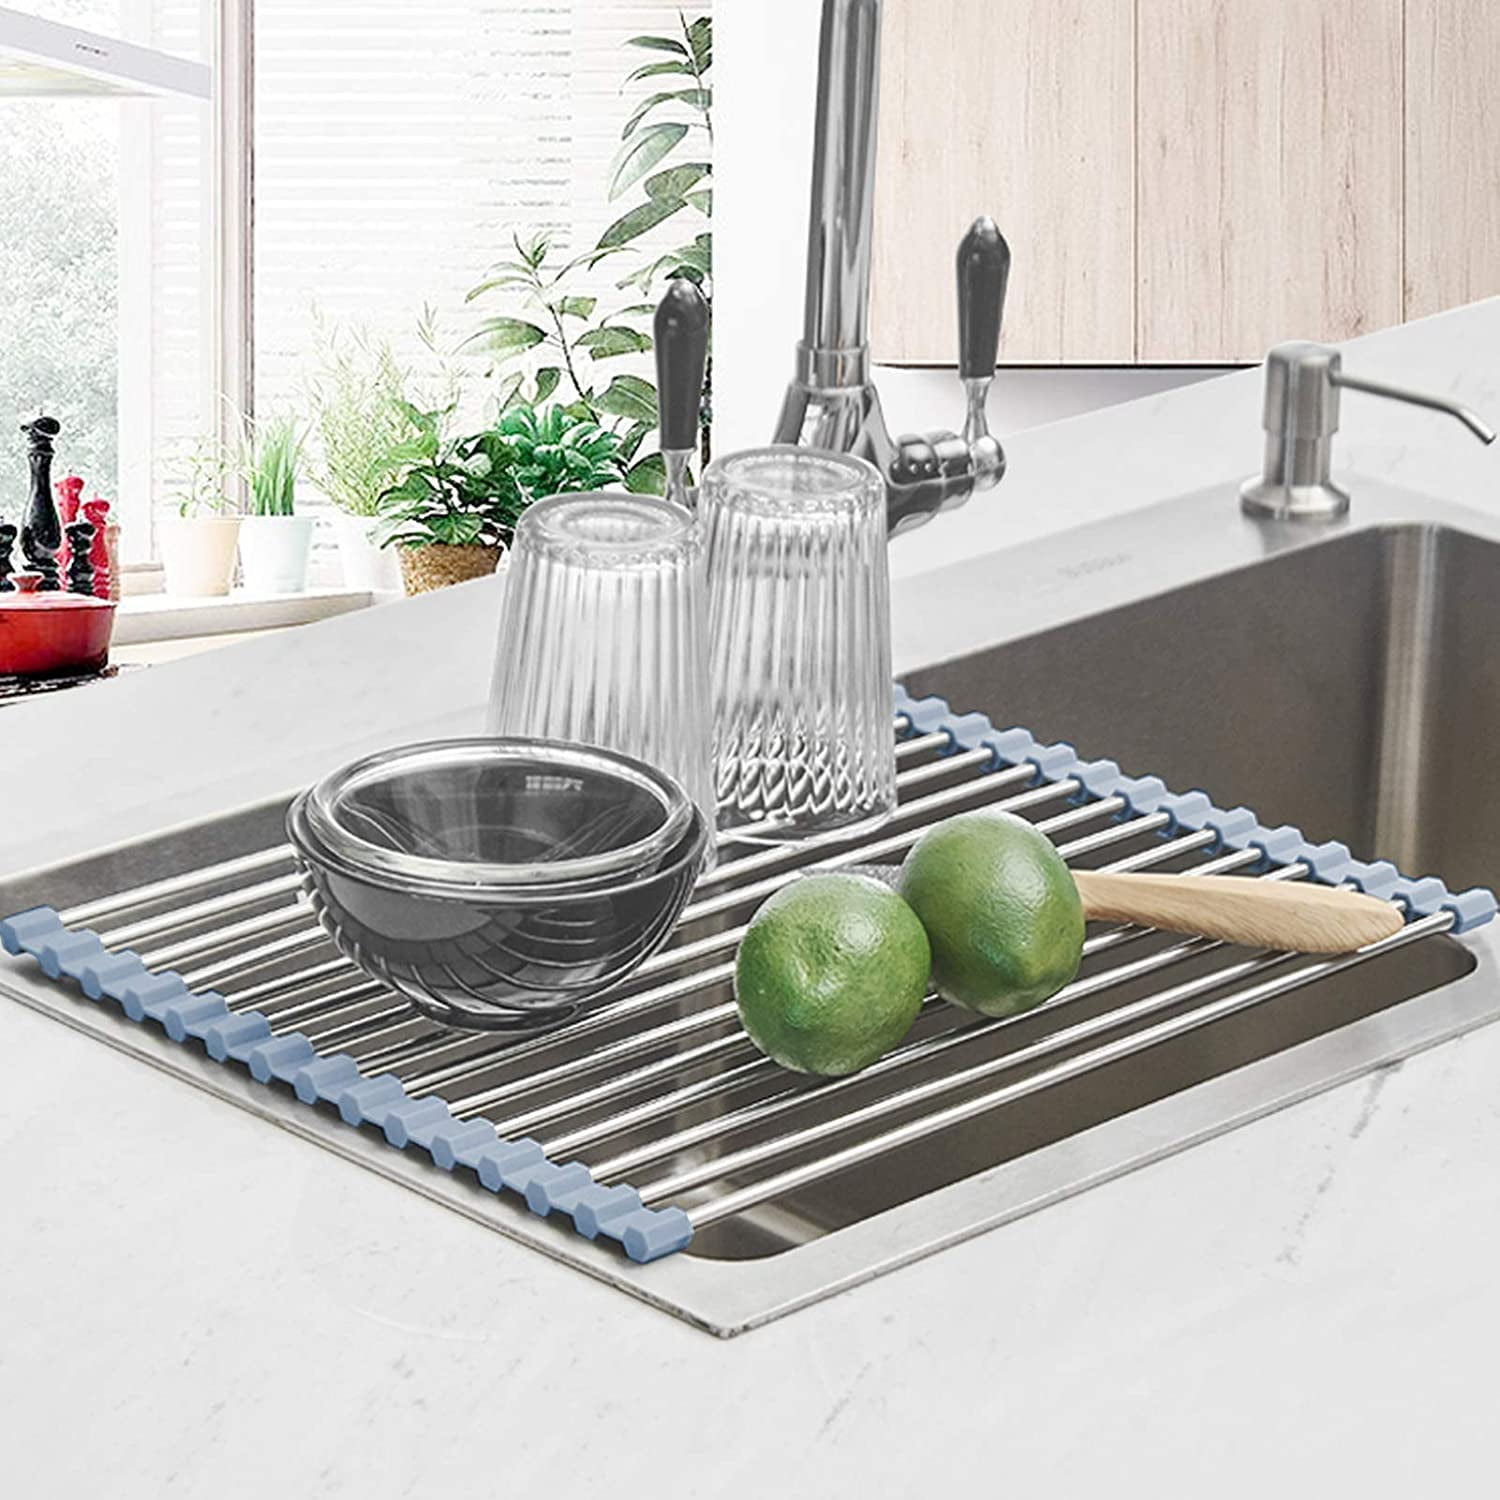 MERRYBOX Roll Up Dish Drying Rack, Over The Sink Dish Rack Foldable,  Heat-Resistant, Anti-Slip Silicone Coated Steel Dish Drainer for Kitchen  Sink